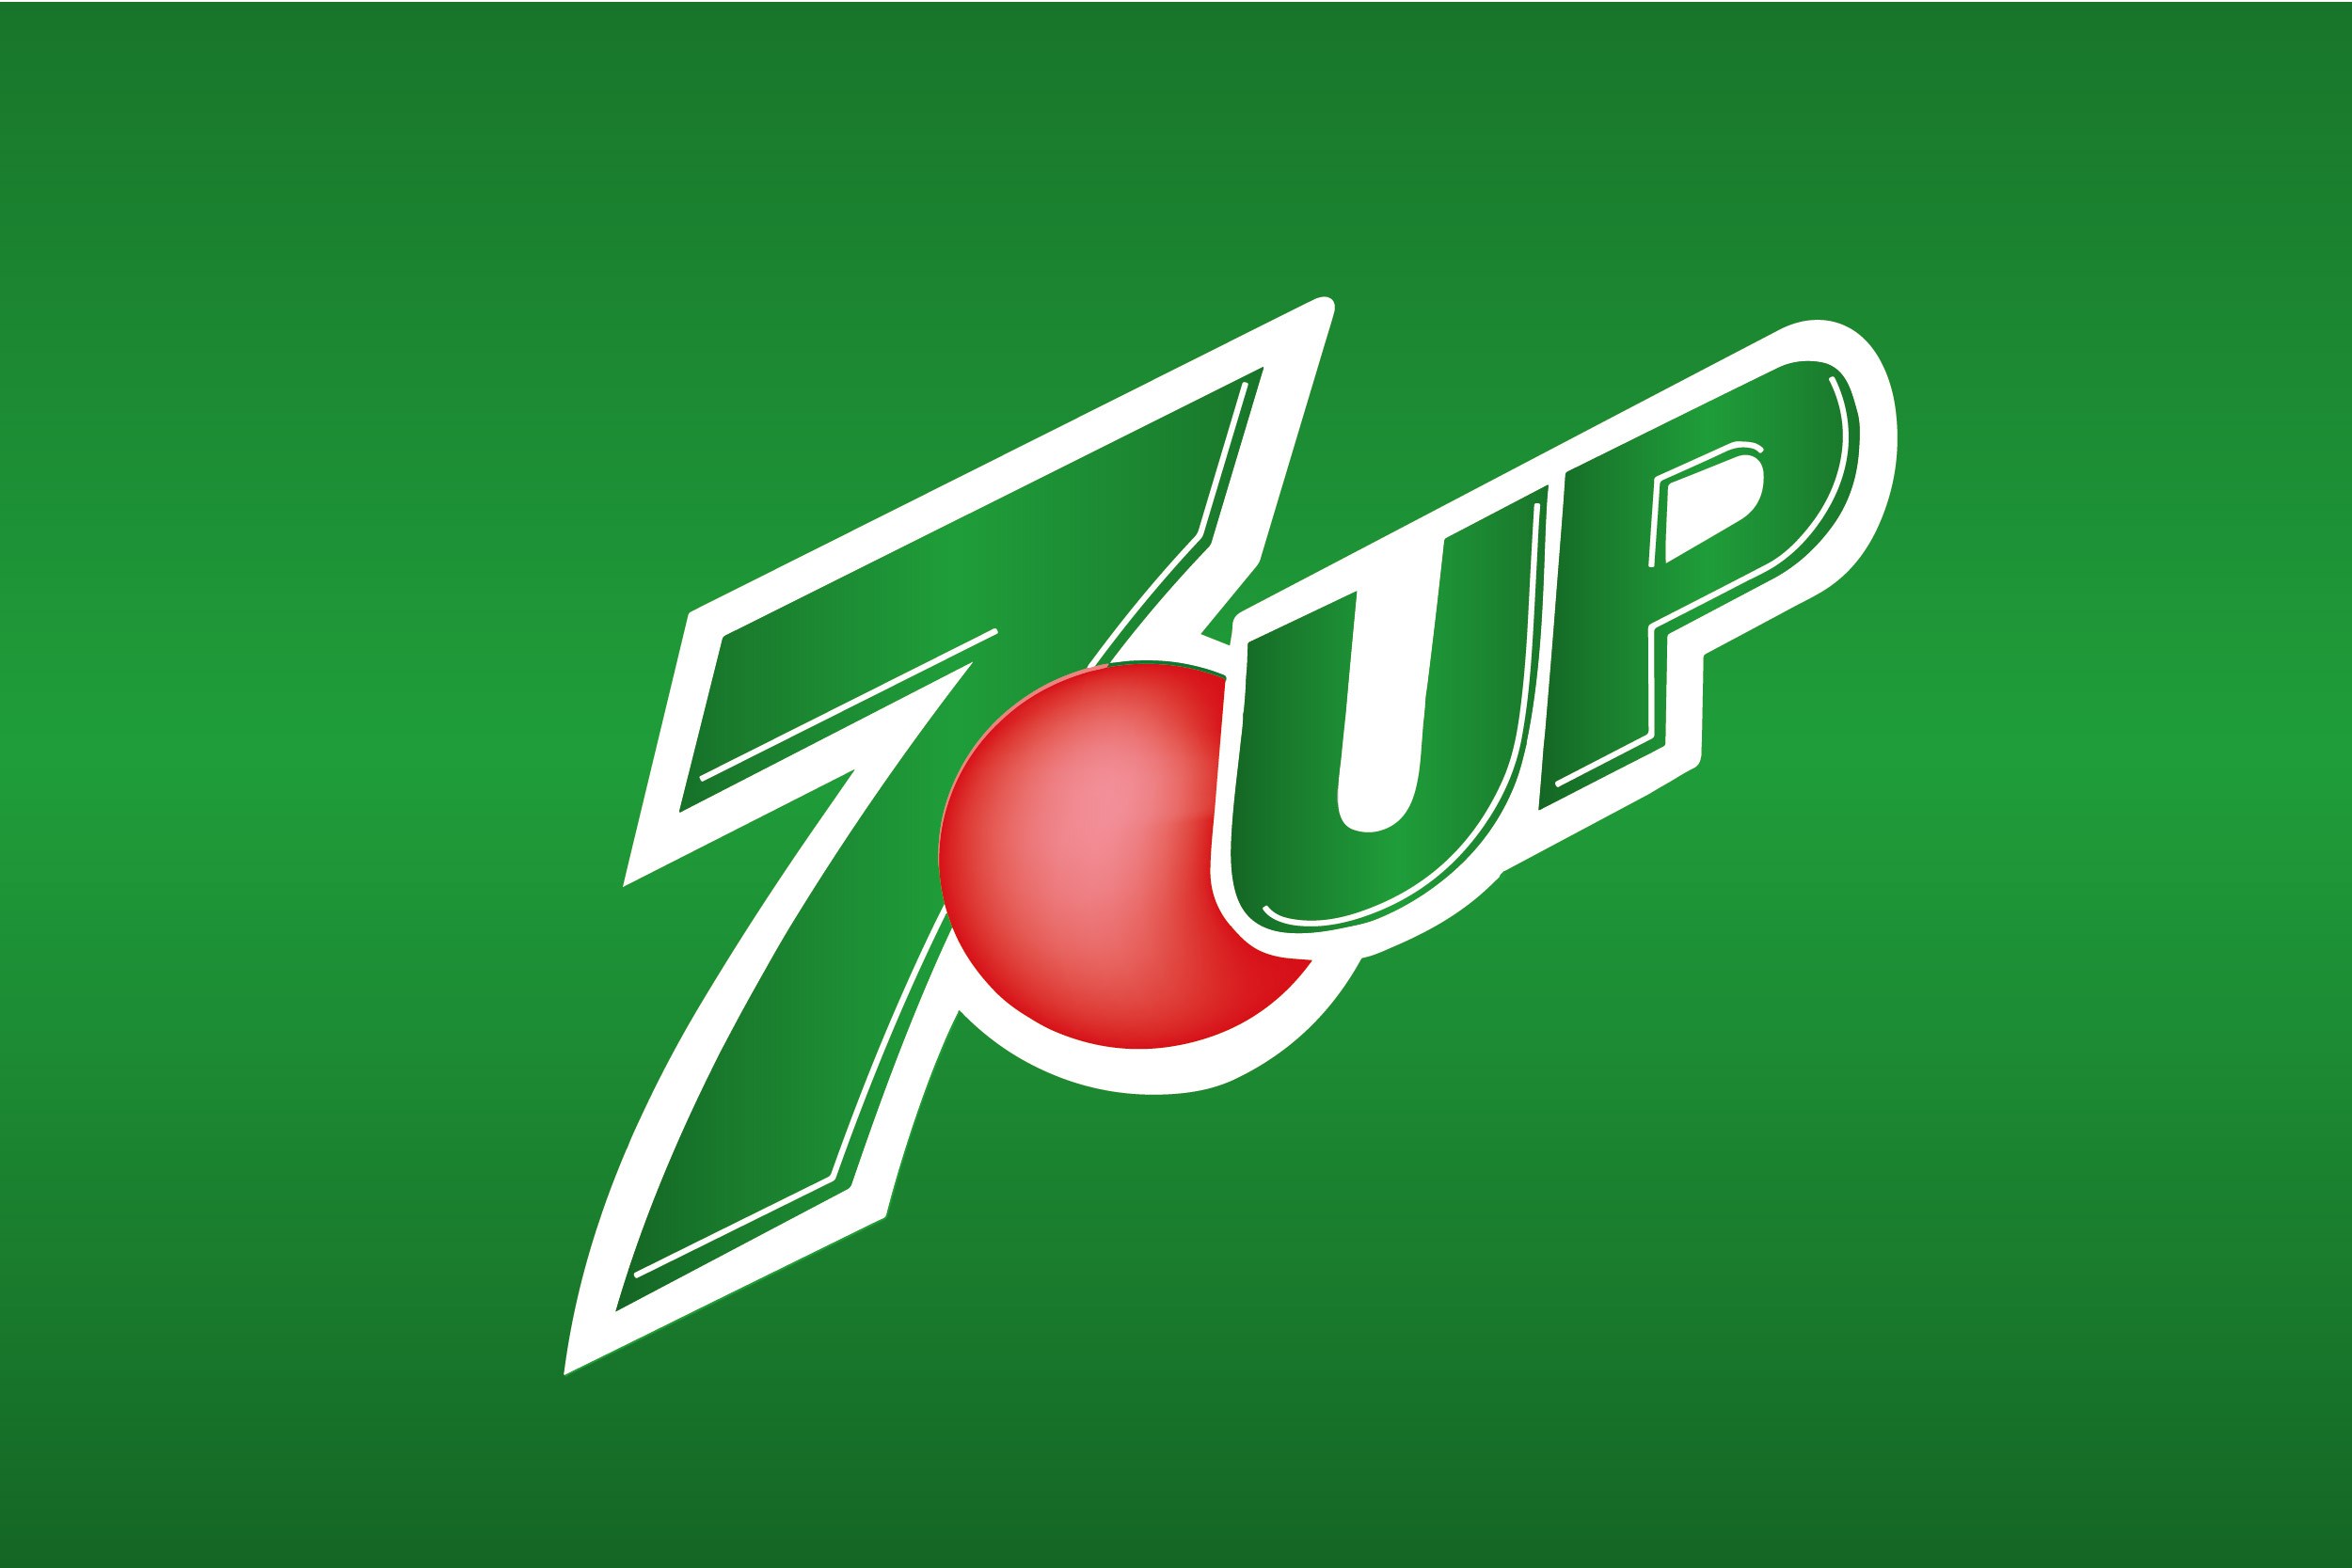 7up Declares N11b Loss as Shareholders Get no Dividend